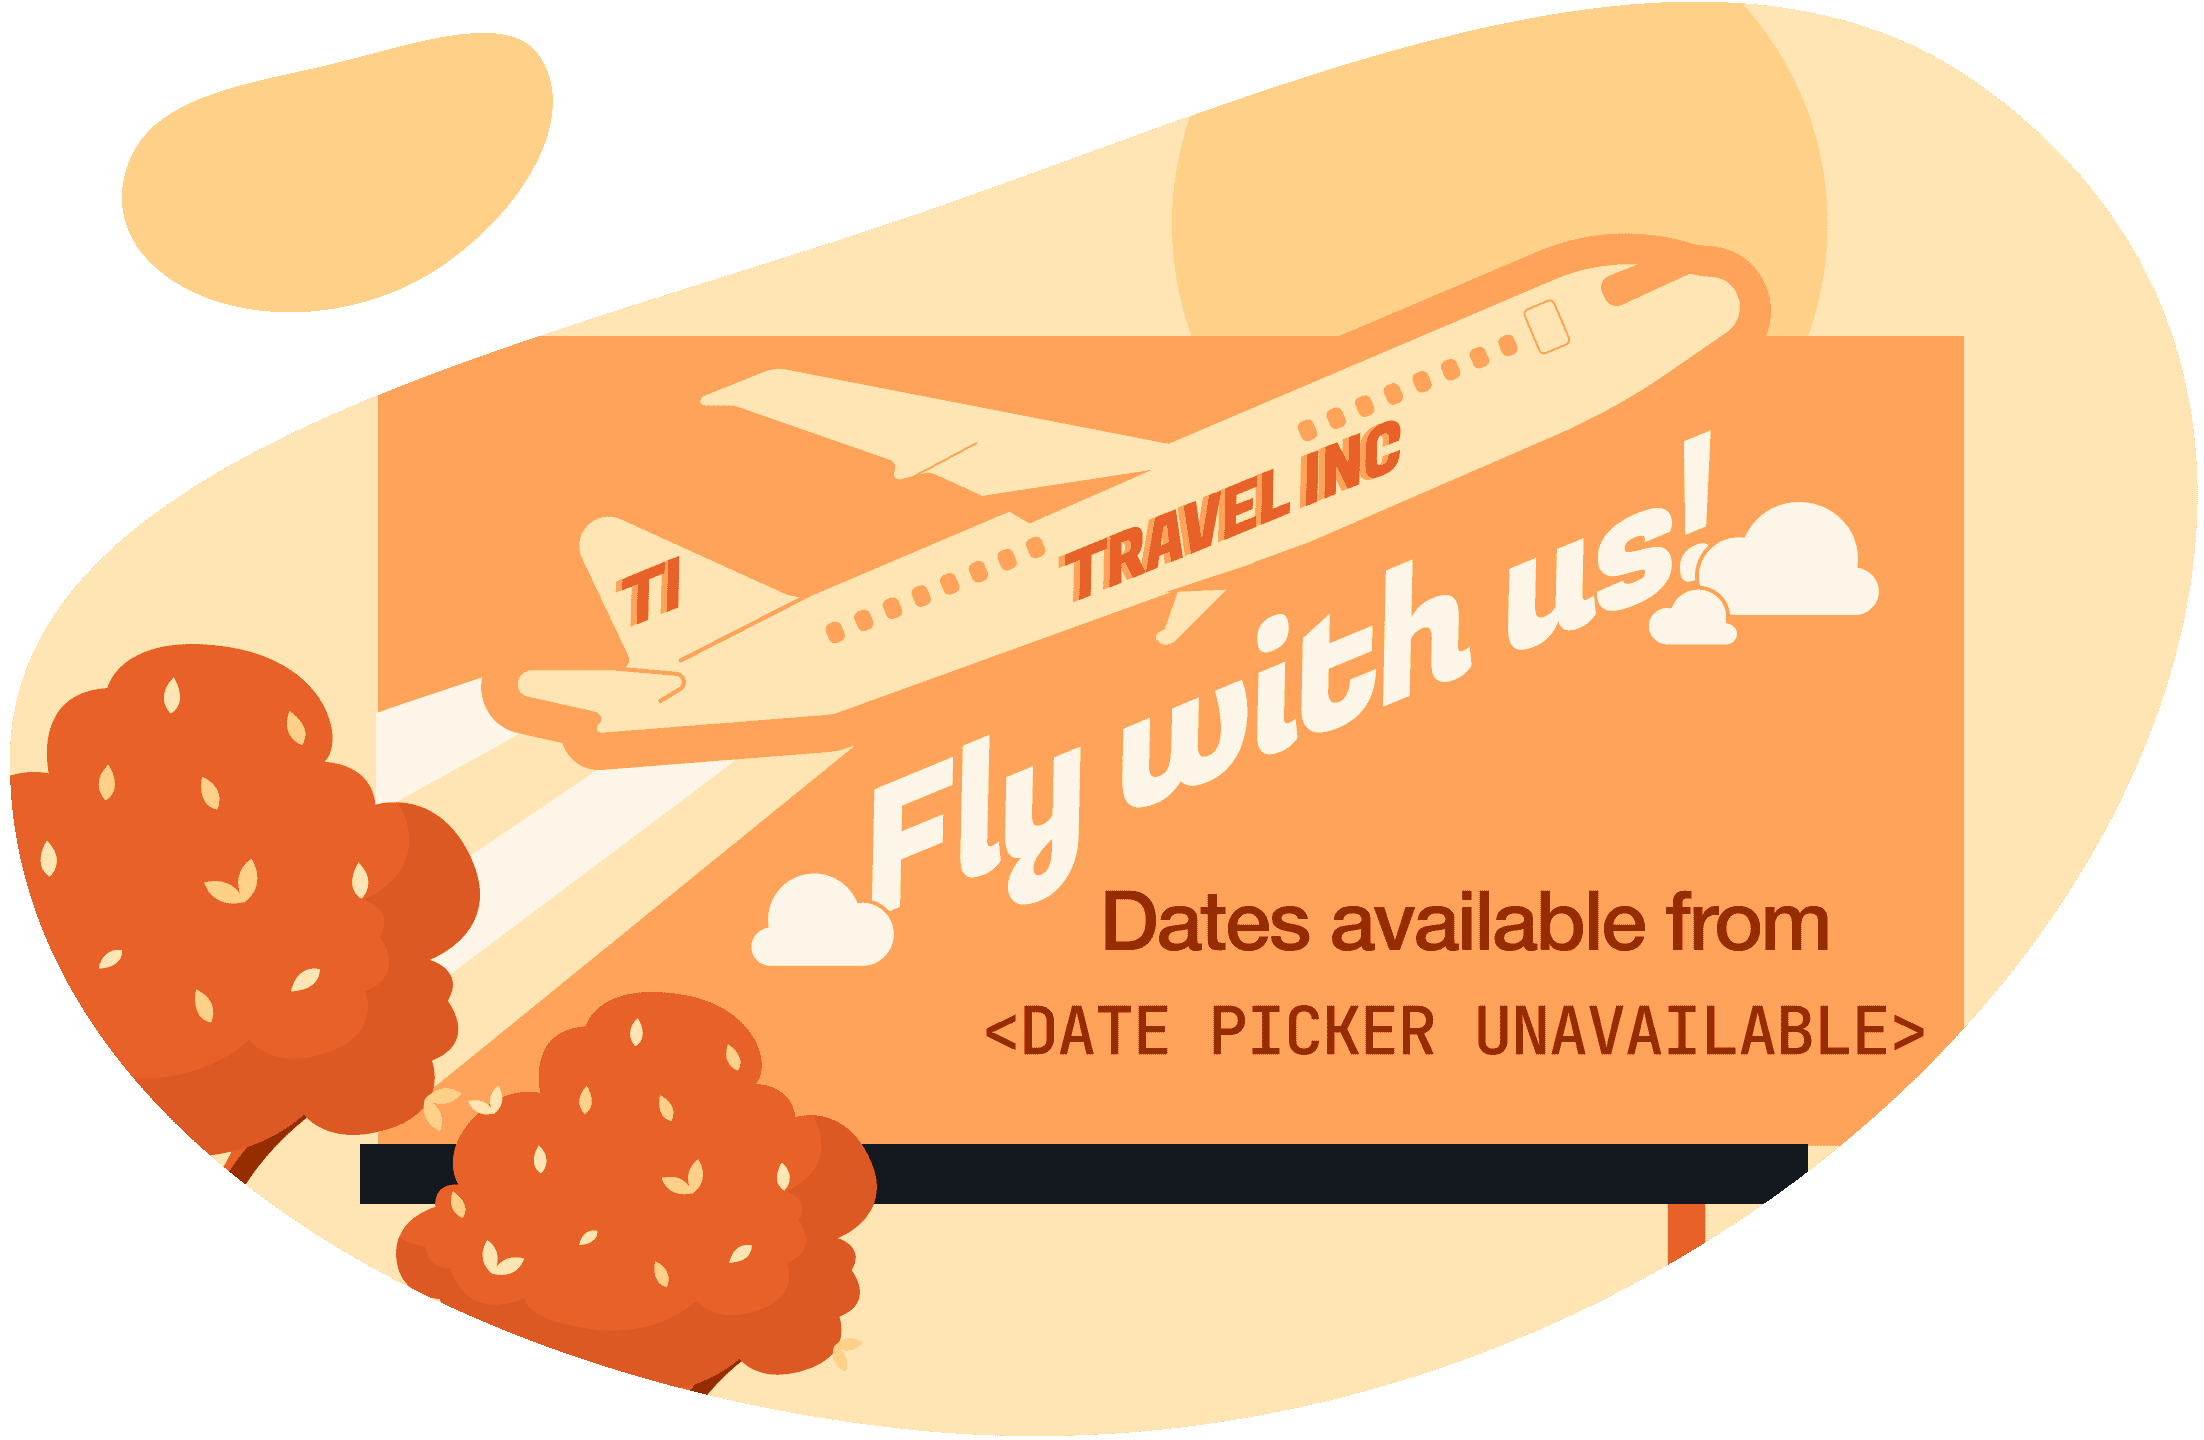 Stylized billboard for the Travel industry with a message that reads “Dates available from Date Picker Unavailable”